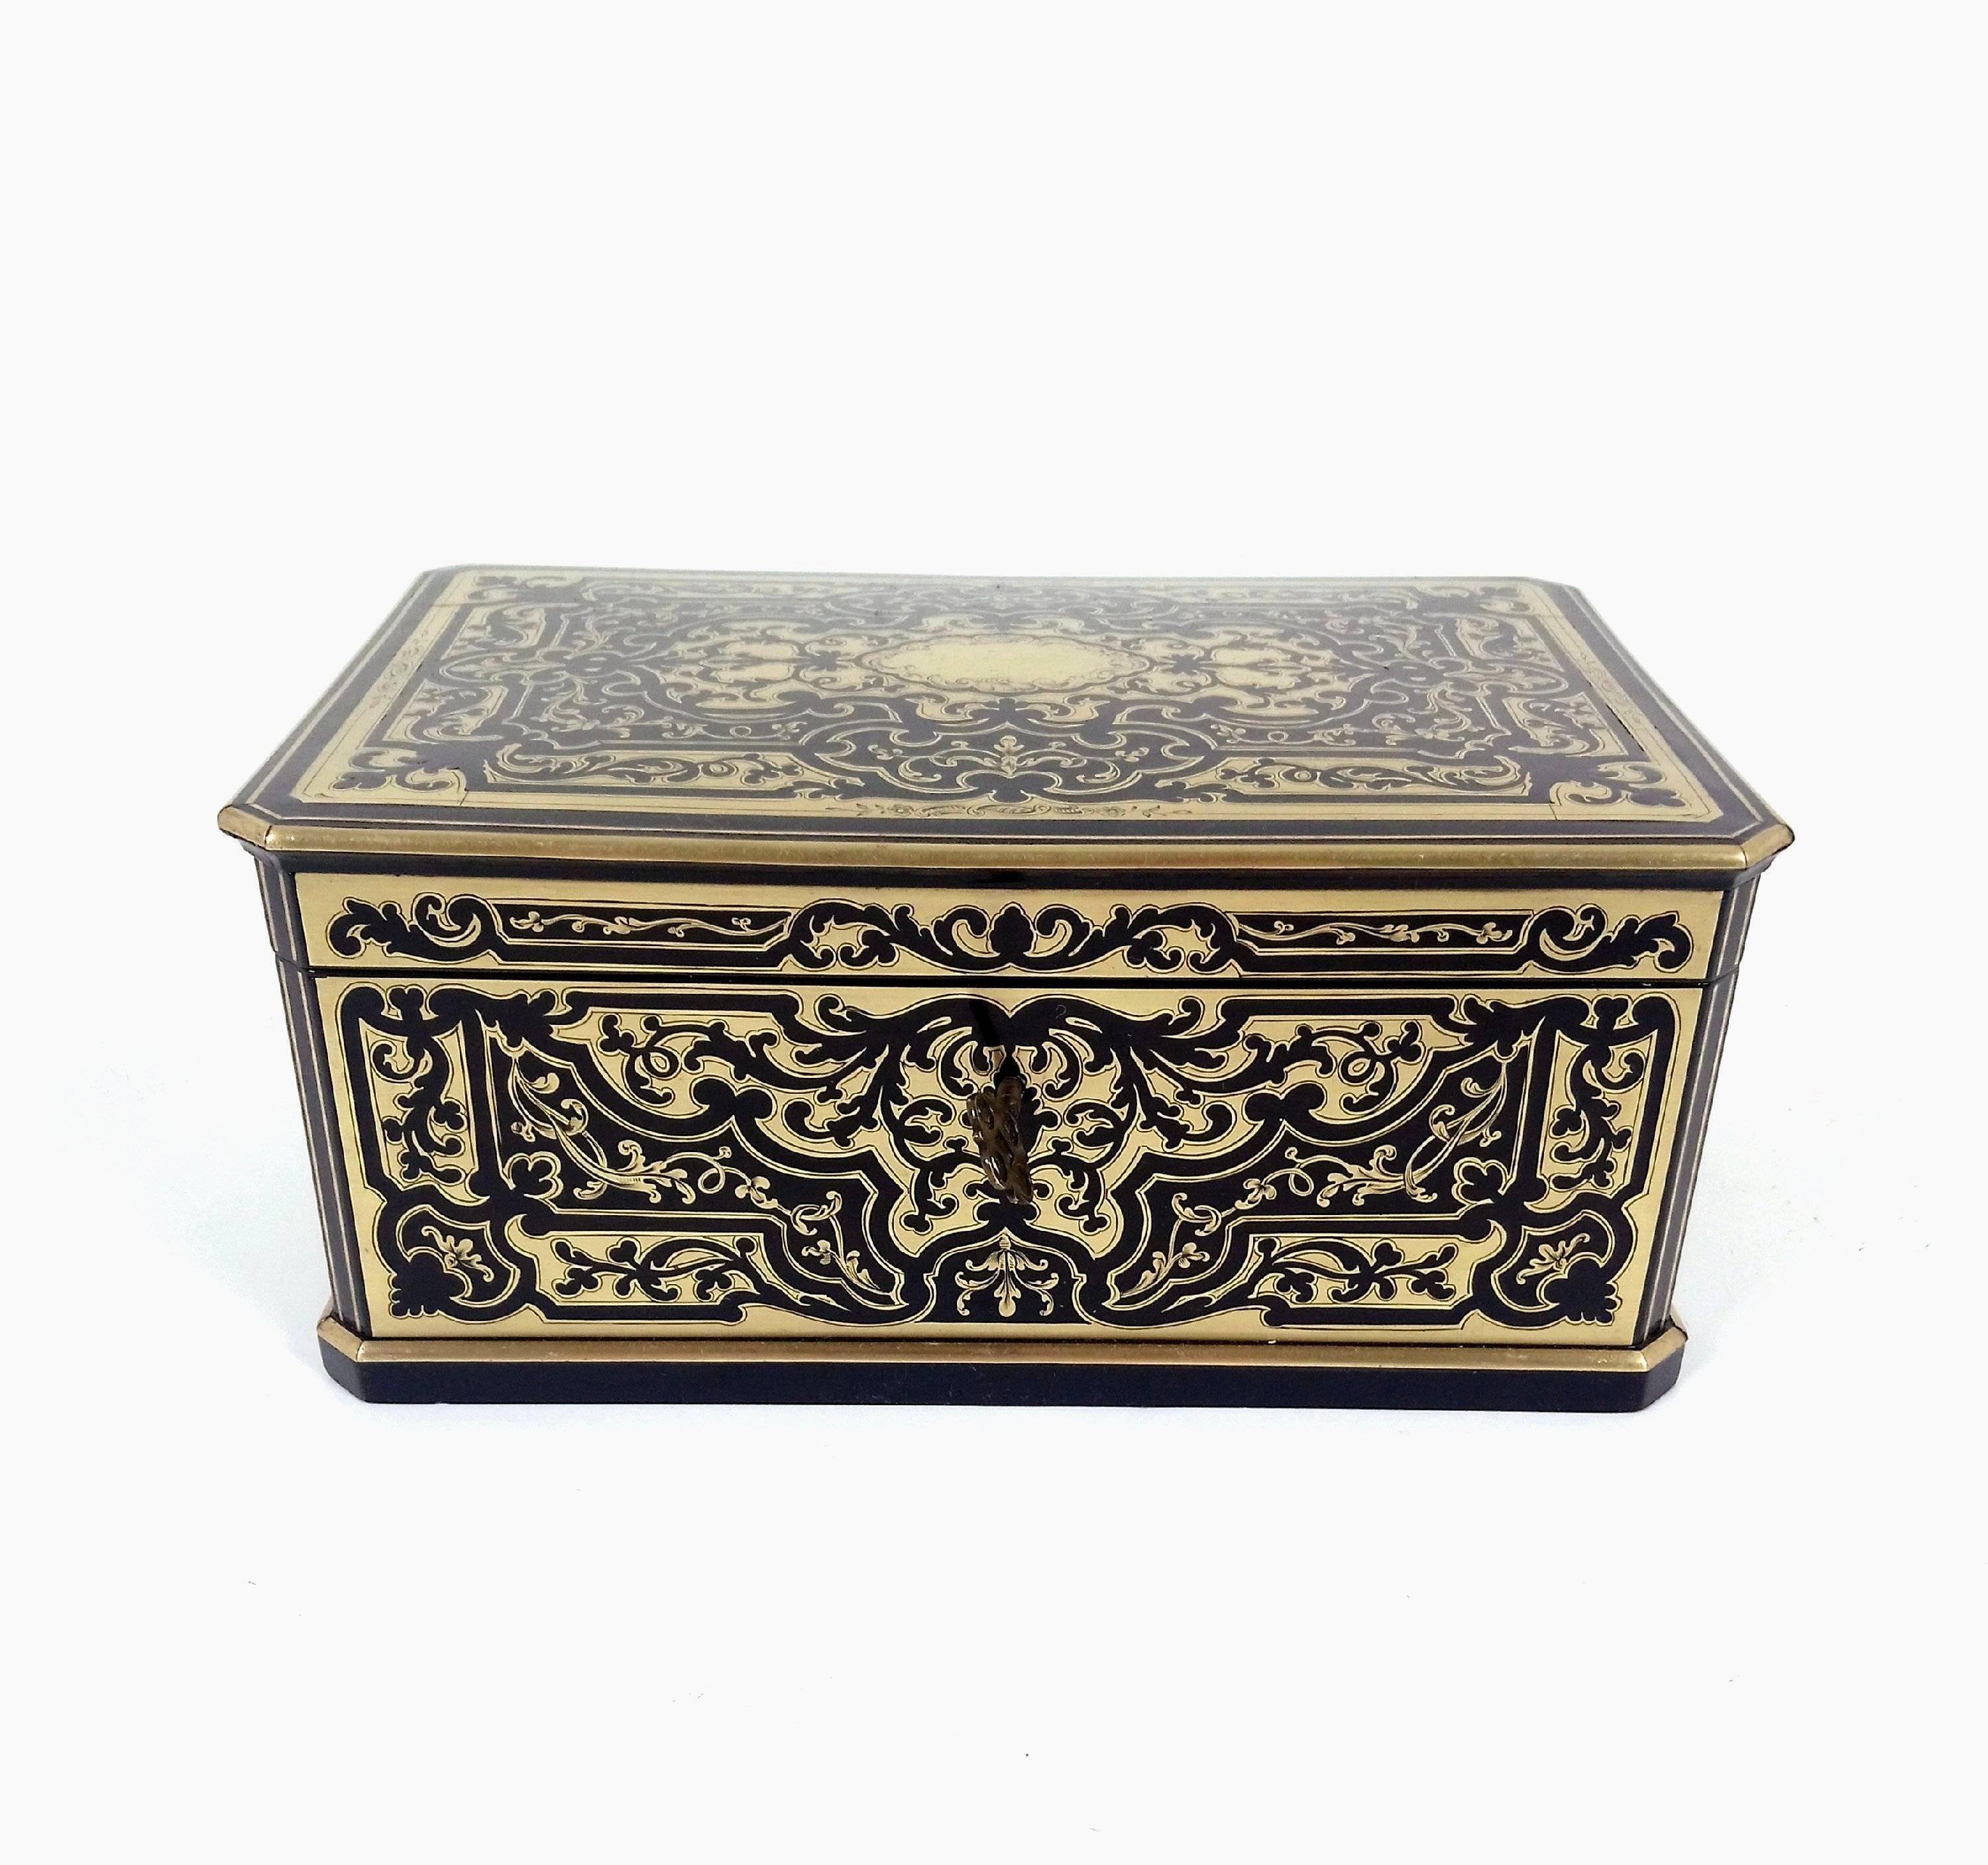 Superb Mid-19th Century French Boulle Box by Tahan, Paris 2